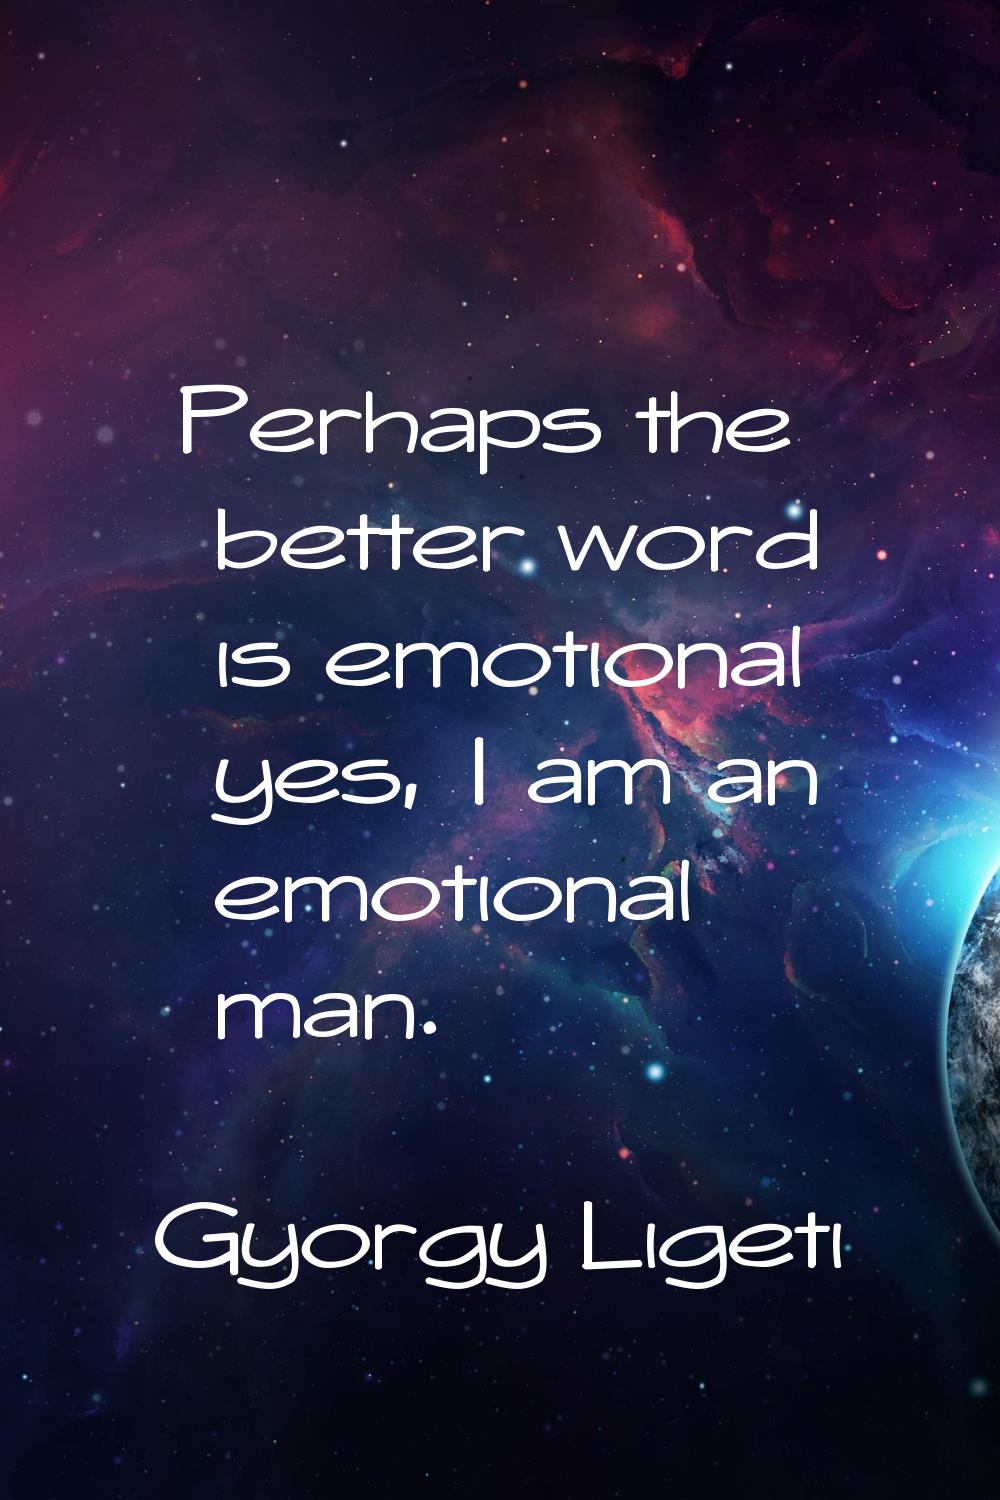 Perhaps the better word is emotional yes, I am an emotional man.